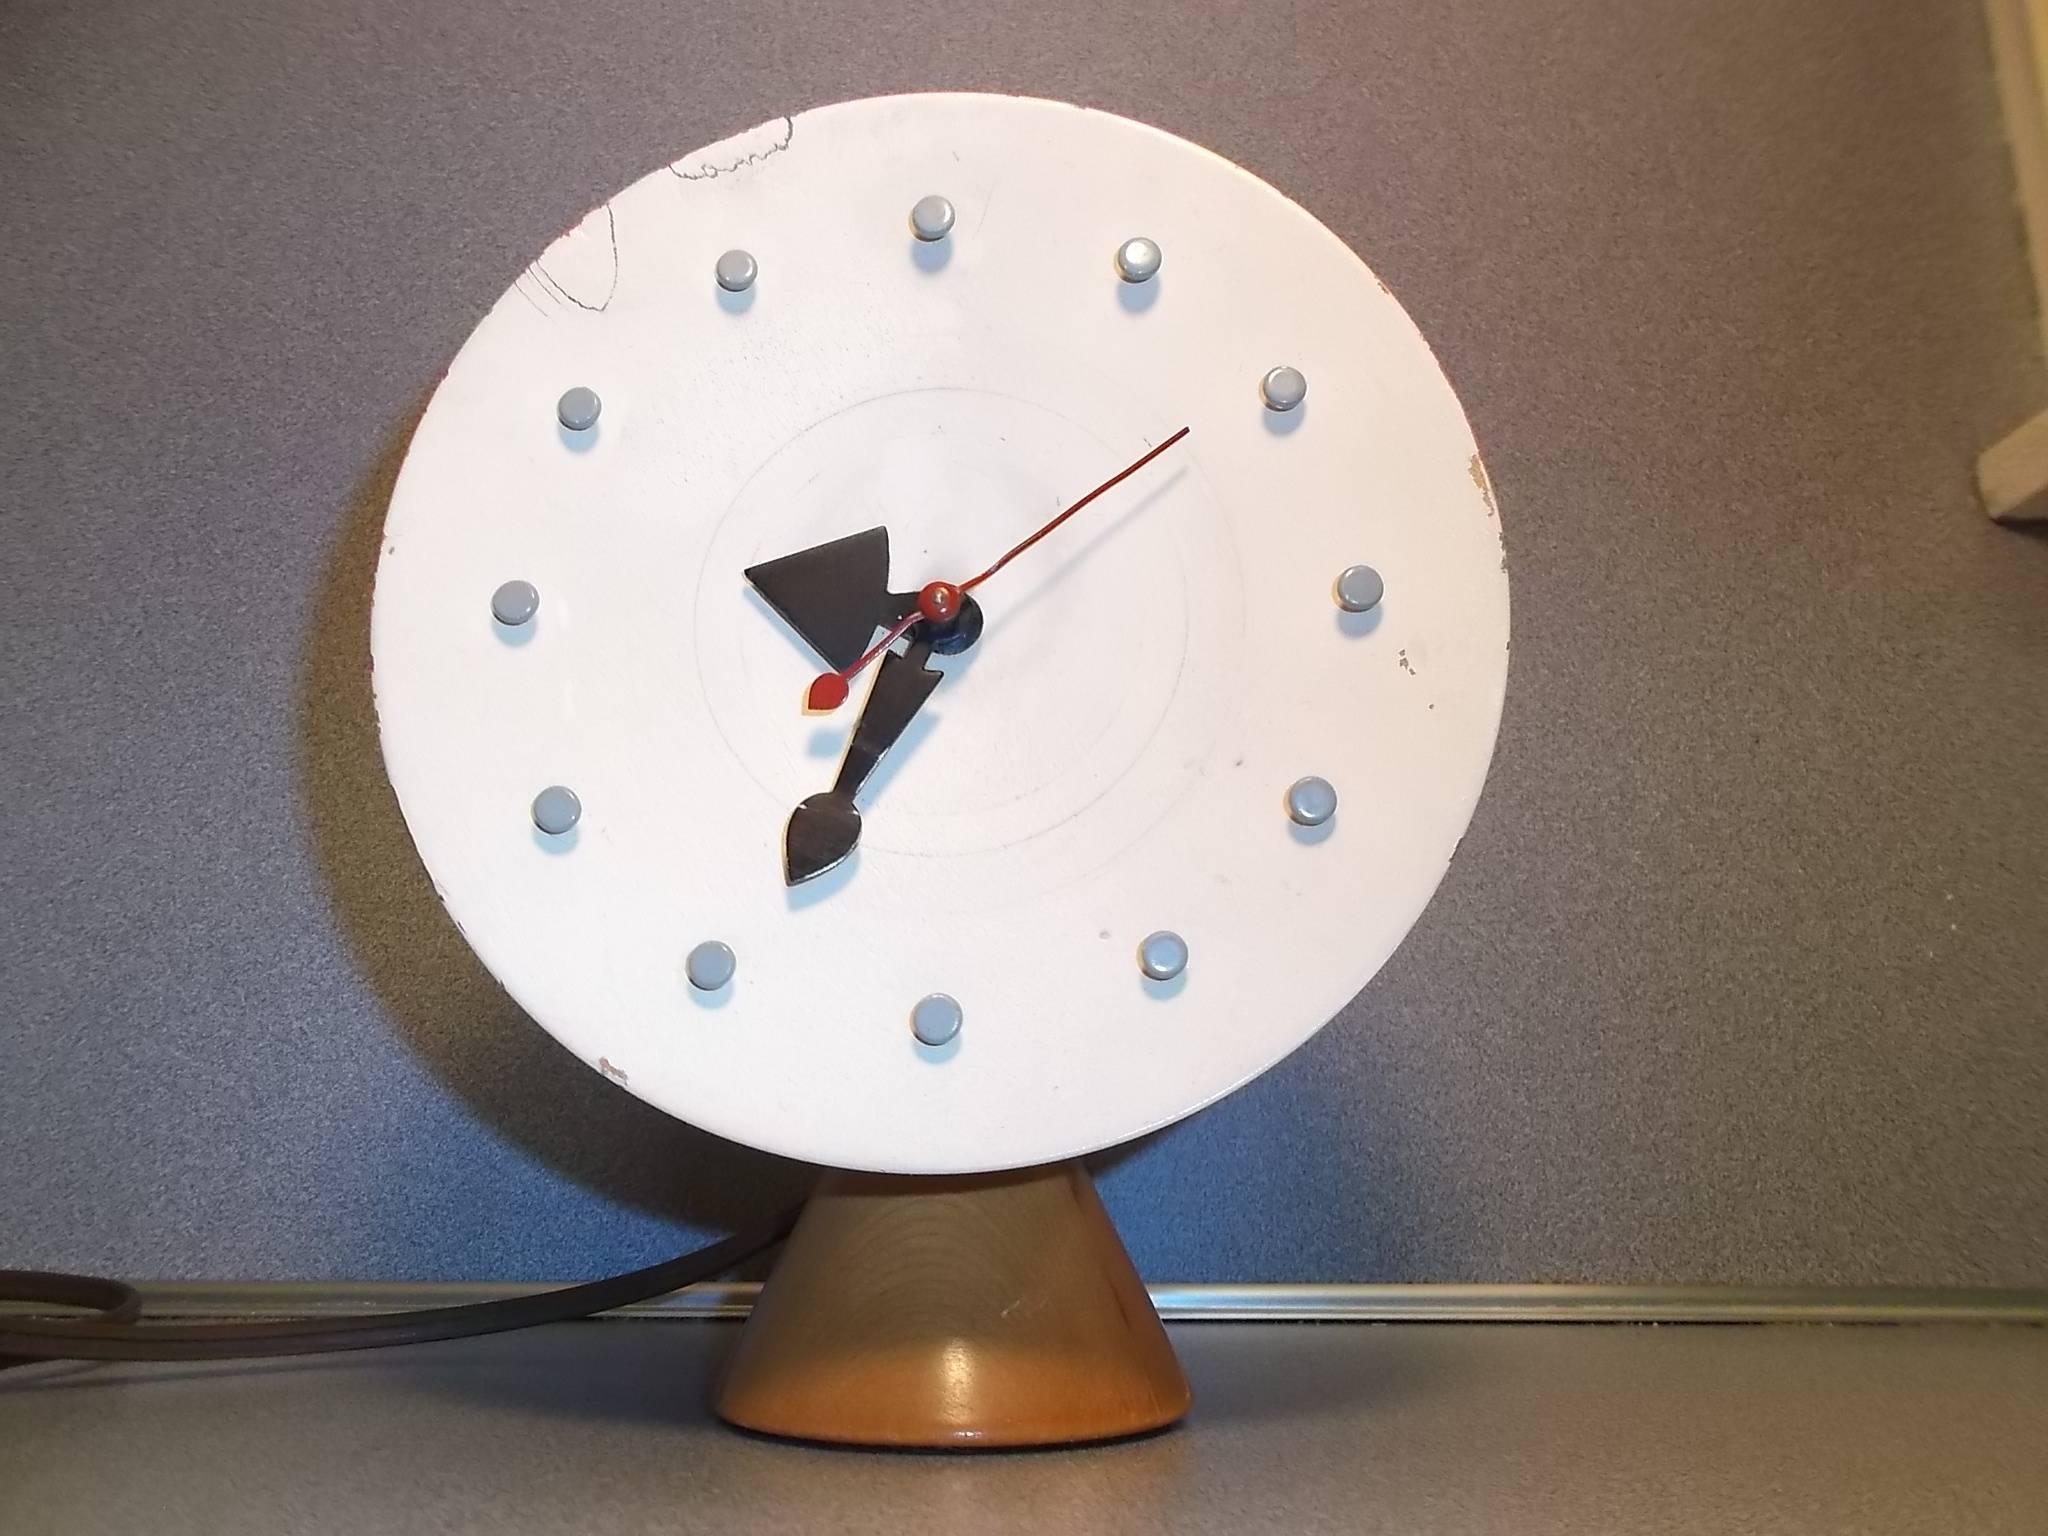 This is one of the rarer table clock versions to find by George Nelson. It features a white painted concave wooden face with black wood casing, and natural wood conical base. It has all of its orig. hands, and small grey thumbtack like hour markers.